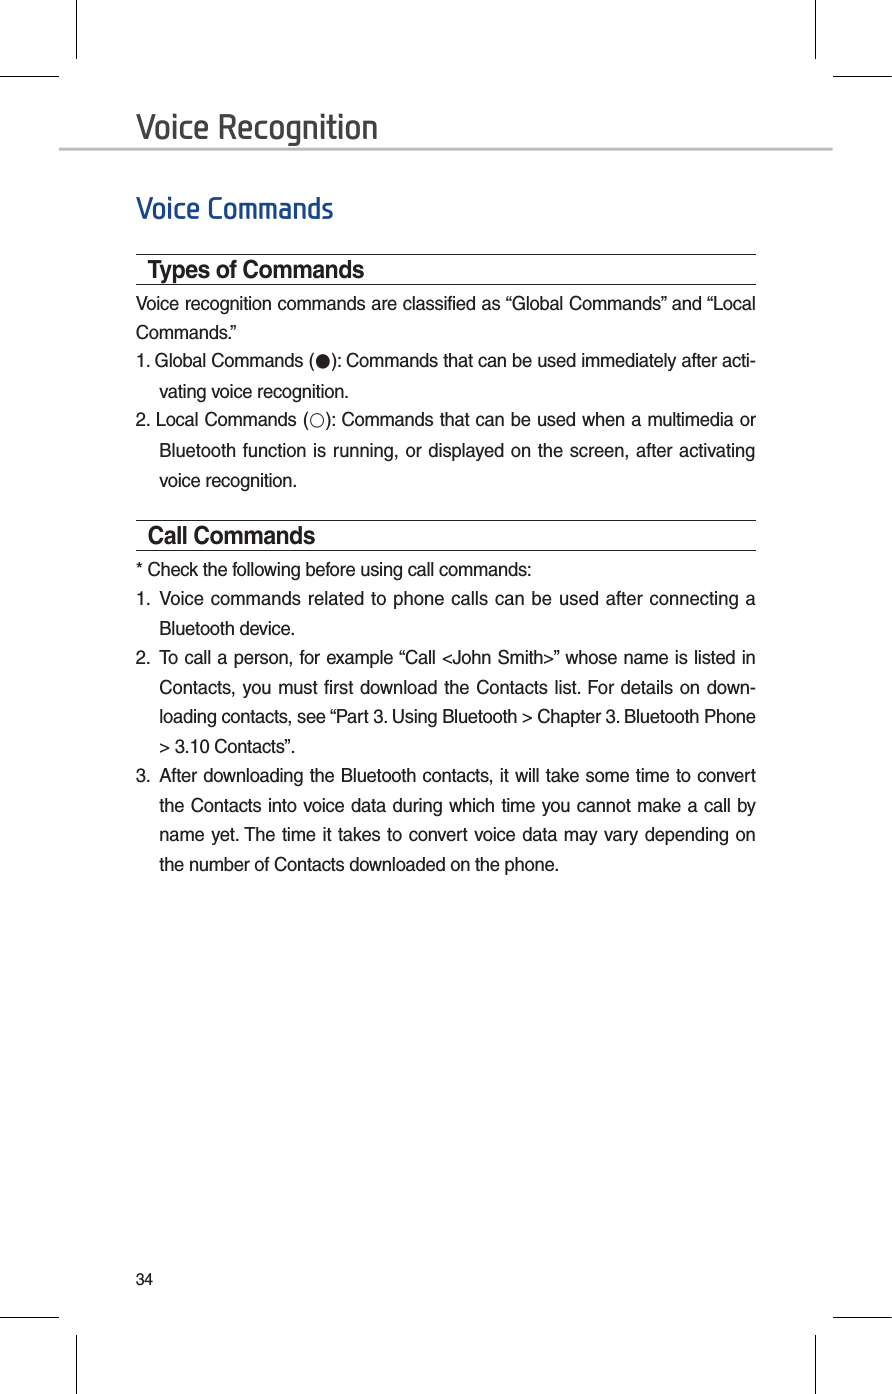 34Voice CommandsTypes of CommandsVoice recognition commands are classified as “Global Commands” and “Local Commands.”1. Global Commands (●): Commands that can be used immediately after acti-vating voice recognition.2. Local Commands (○): Commands that can be used when a multimedia or Bluetooth function is running, or displayed on the screen, after activating voice recognition.Call Commands* Check the following before using call commands:1.  Voice commands related to phone calls can  be used after connecting a Bluetooth device. 2.  To call a person, for example “Call &lt;John Smith&gt;” whose name is listed in Contacts, you must first download the Contacts list. For details on down-loading contacts, see “Part 3. Using Bluetooth &gt; Chapter 3. Bluetooth Phone &gt; 3.10 Contacts”.3.  After downloading the Bluetooth contacts, it will take some time to convert the Contacts into voice data during which time you cannot make a call by name yet. The time it takes to convert voice data may vary depending on the number of Contacts downloaded on the phone.Voice Recognition